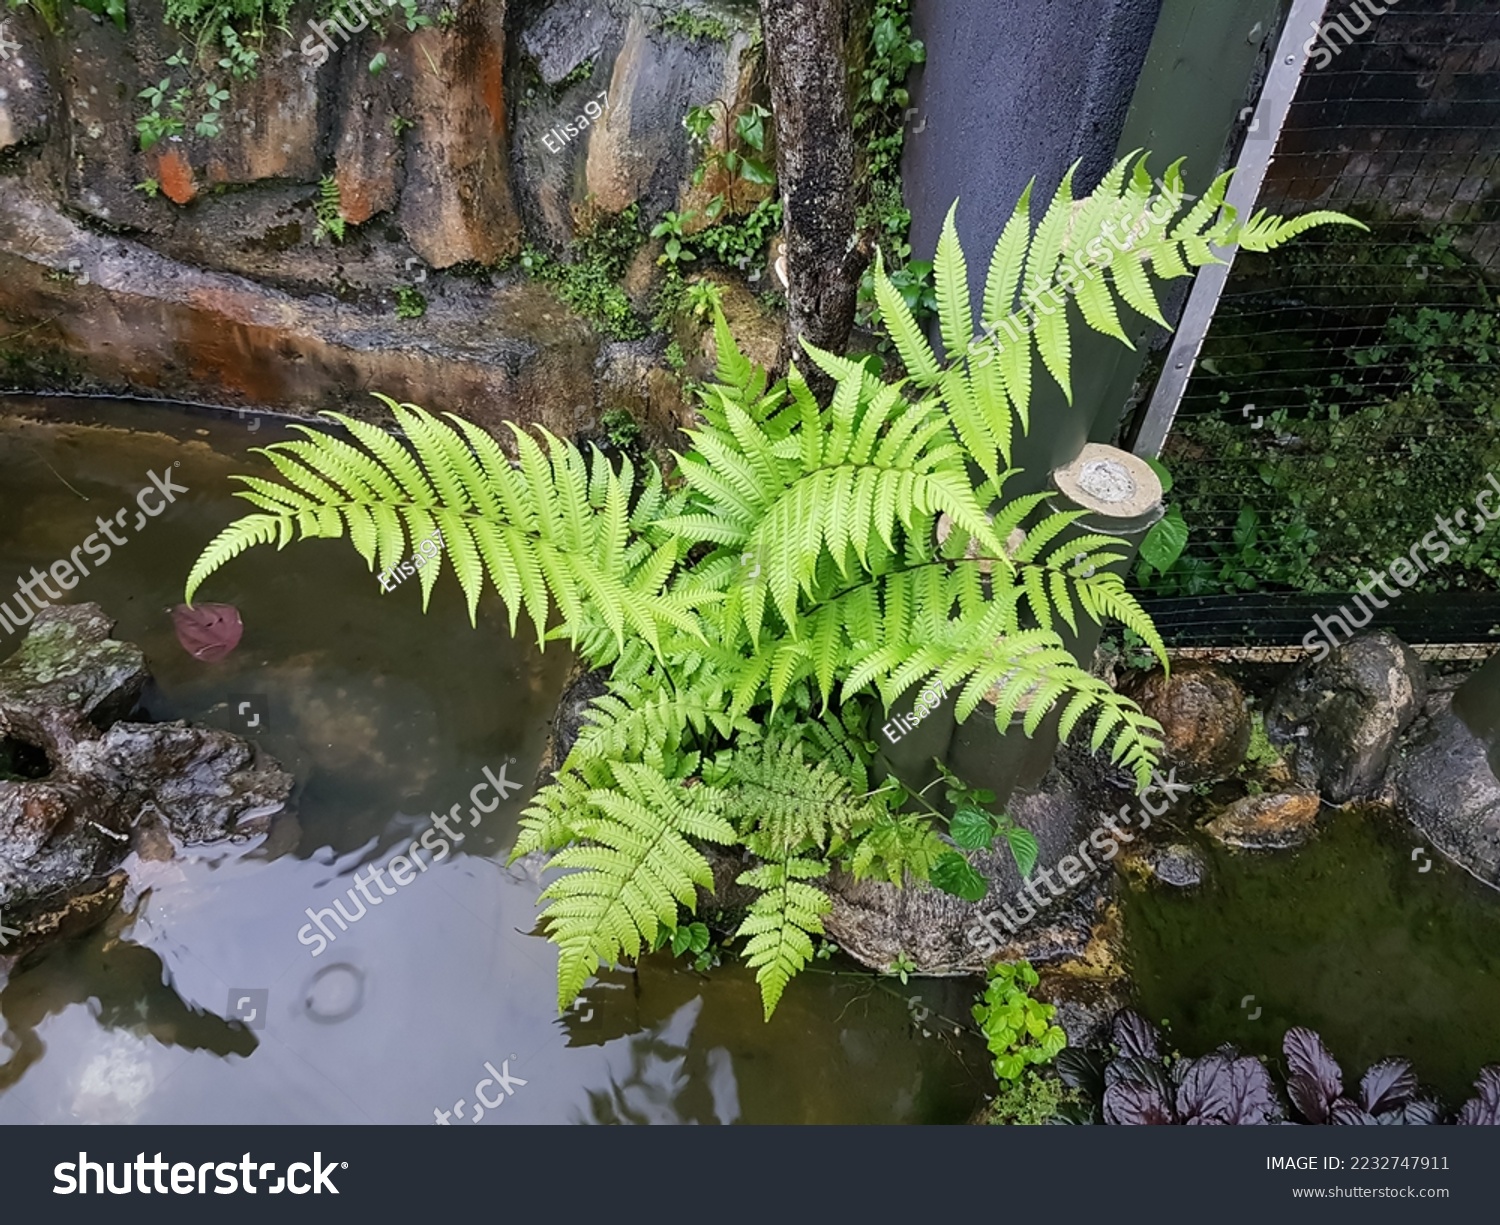 pteridophyte is a vascular plant that disperses spores. Because pteridophytes produce neither flowers nor seeds, they are sometimes referred to as "cryptogams. #2232747911